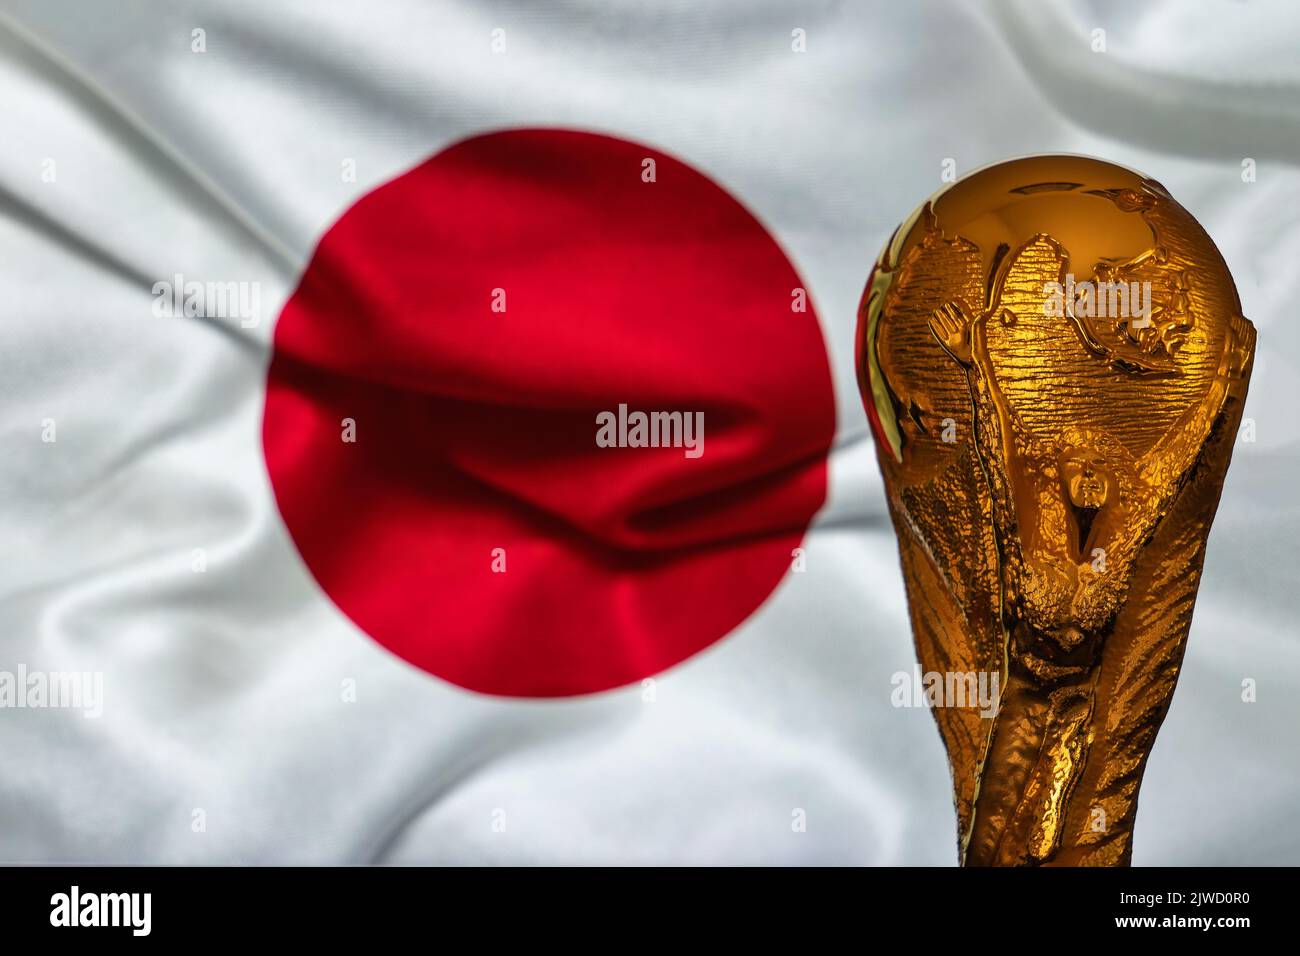 Doha, Qatar - September 4, 2022: FIFA World Cup trophy against the background of Japan flag. Stock Photo